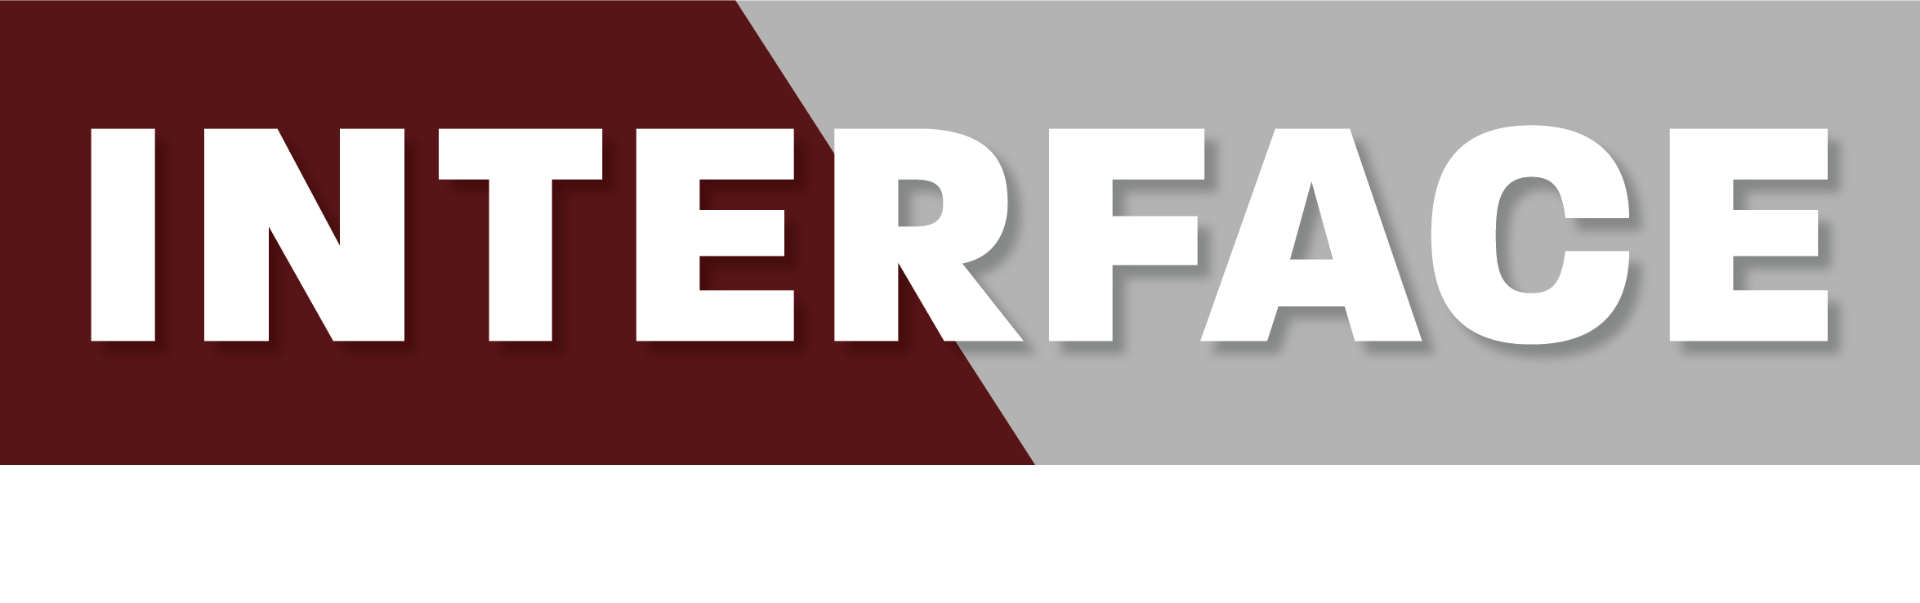 Interface Logo - Interface Consulting - Construction Consulting Firm